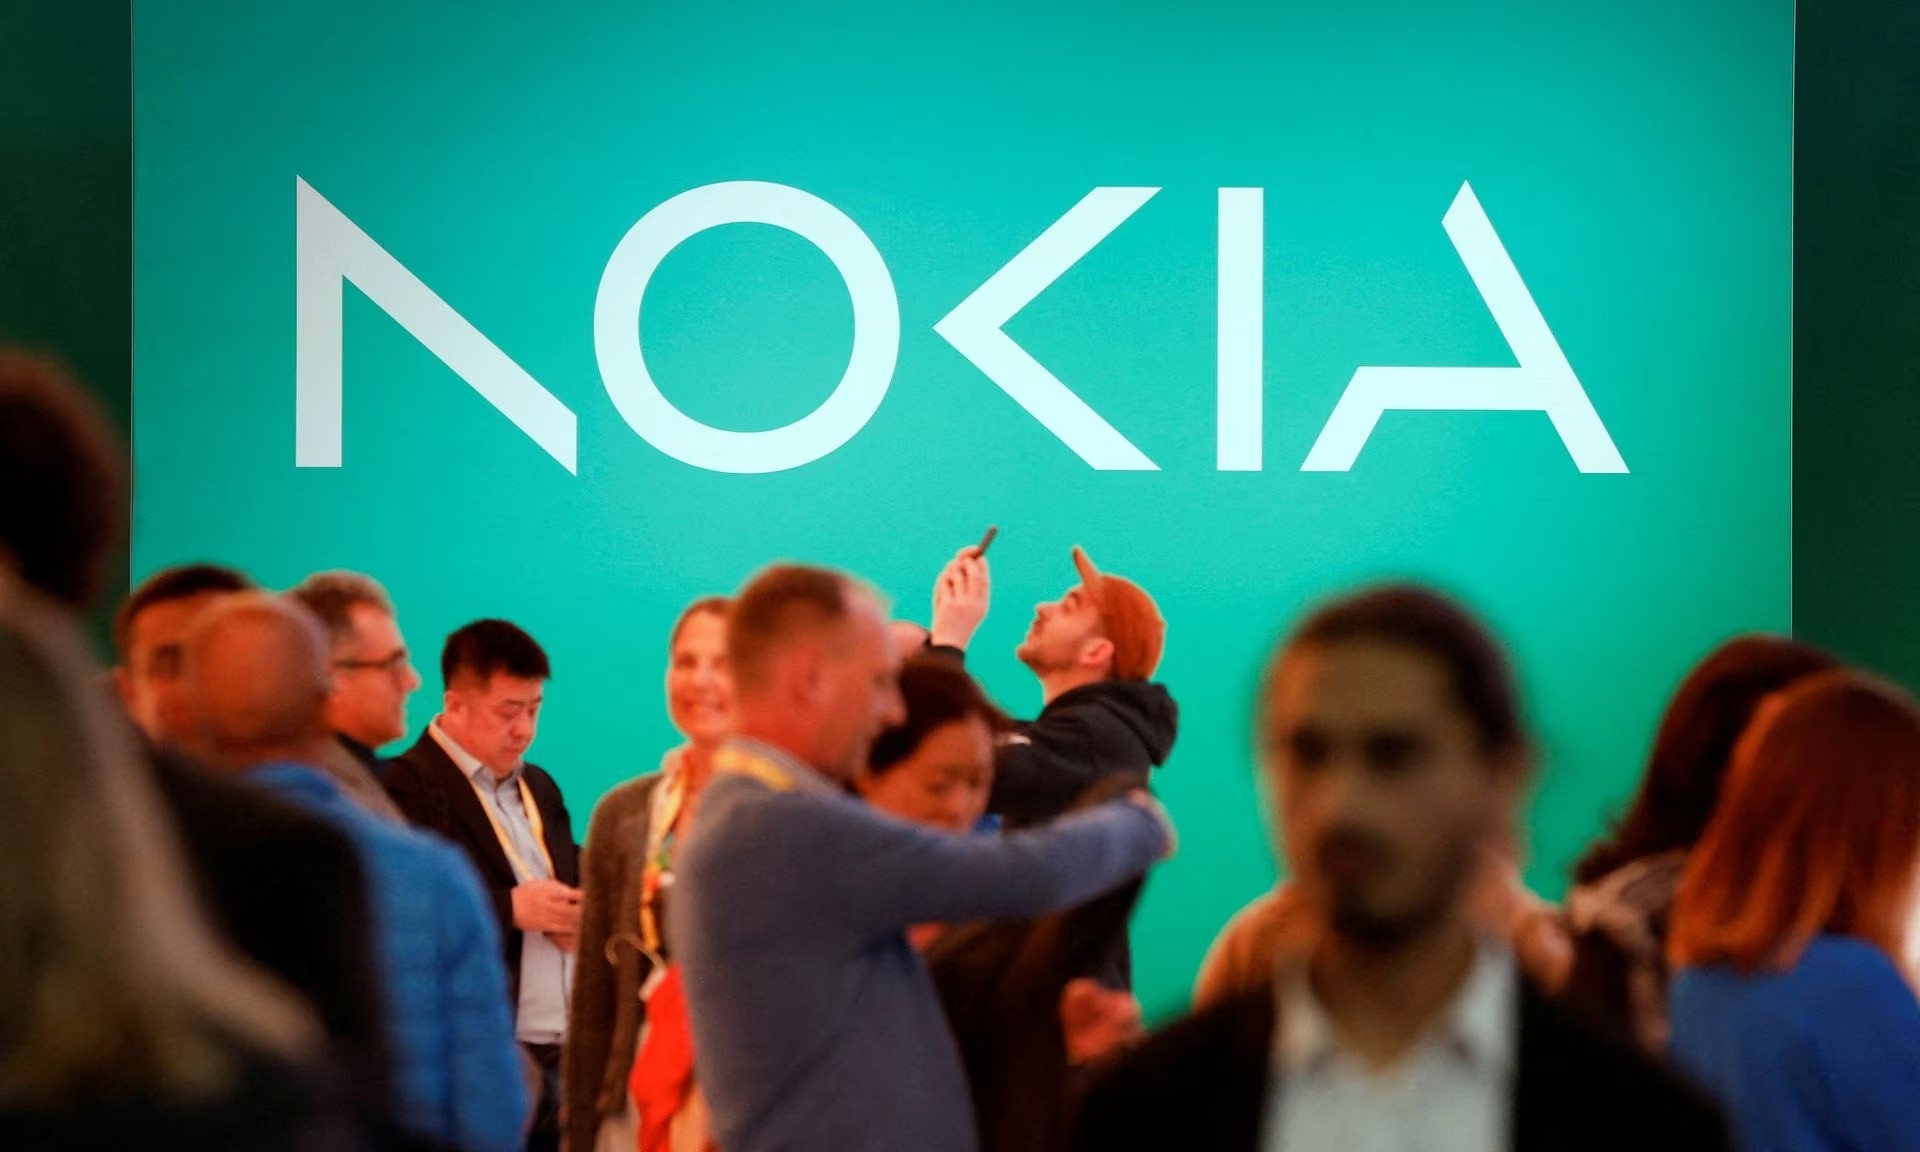 Nokia to cut up to 14,000 jobs as US demand shrinks, growth uncertain